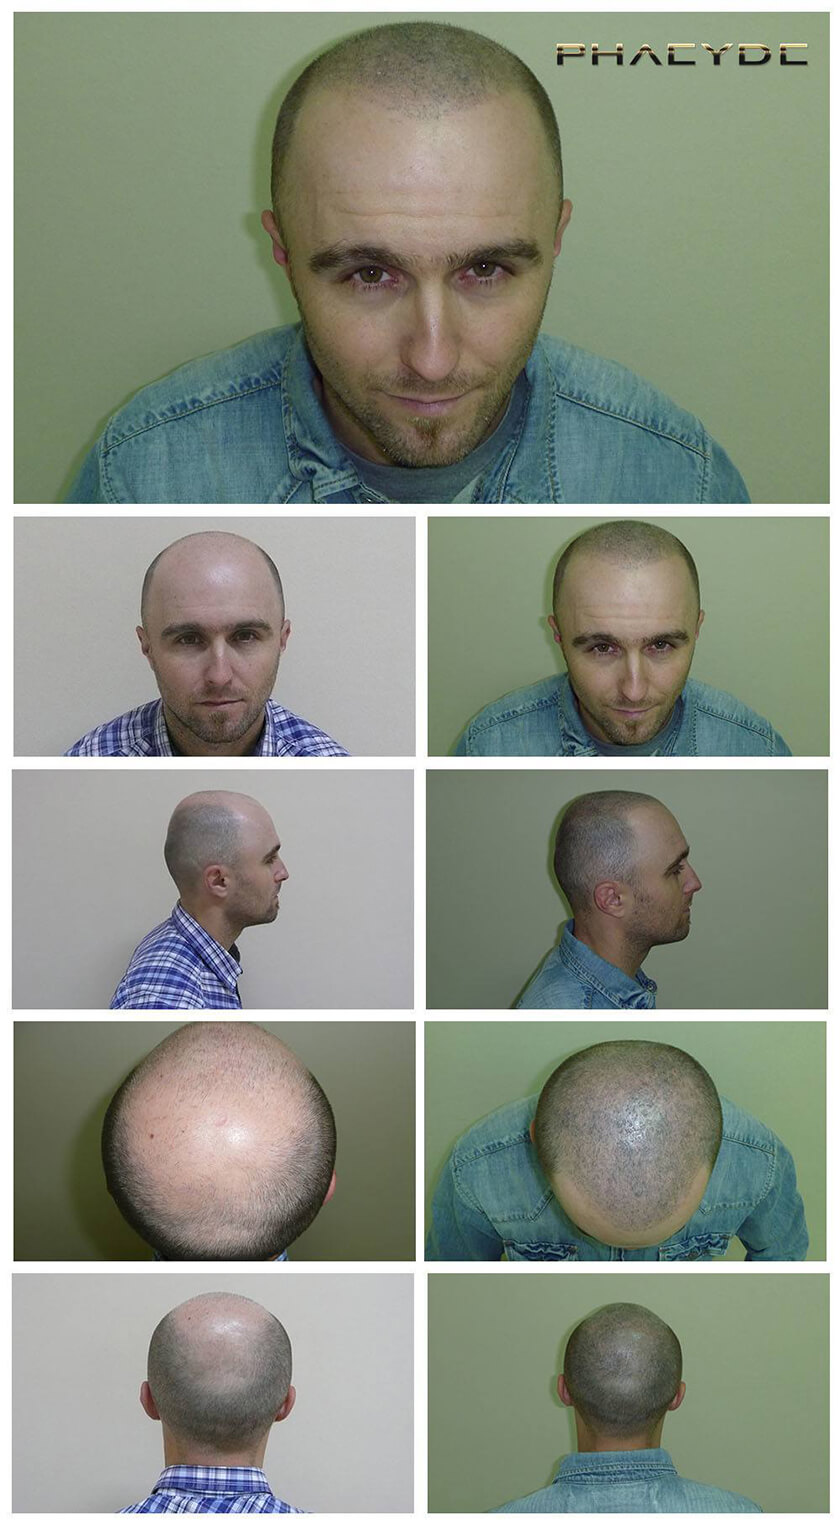 Before After Hair Pigmentation Photos at PHAEYDE Clinic